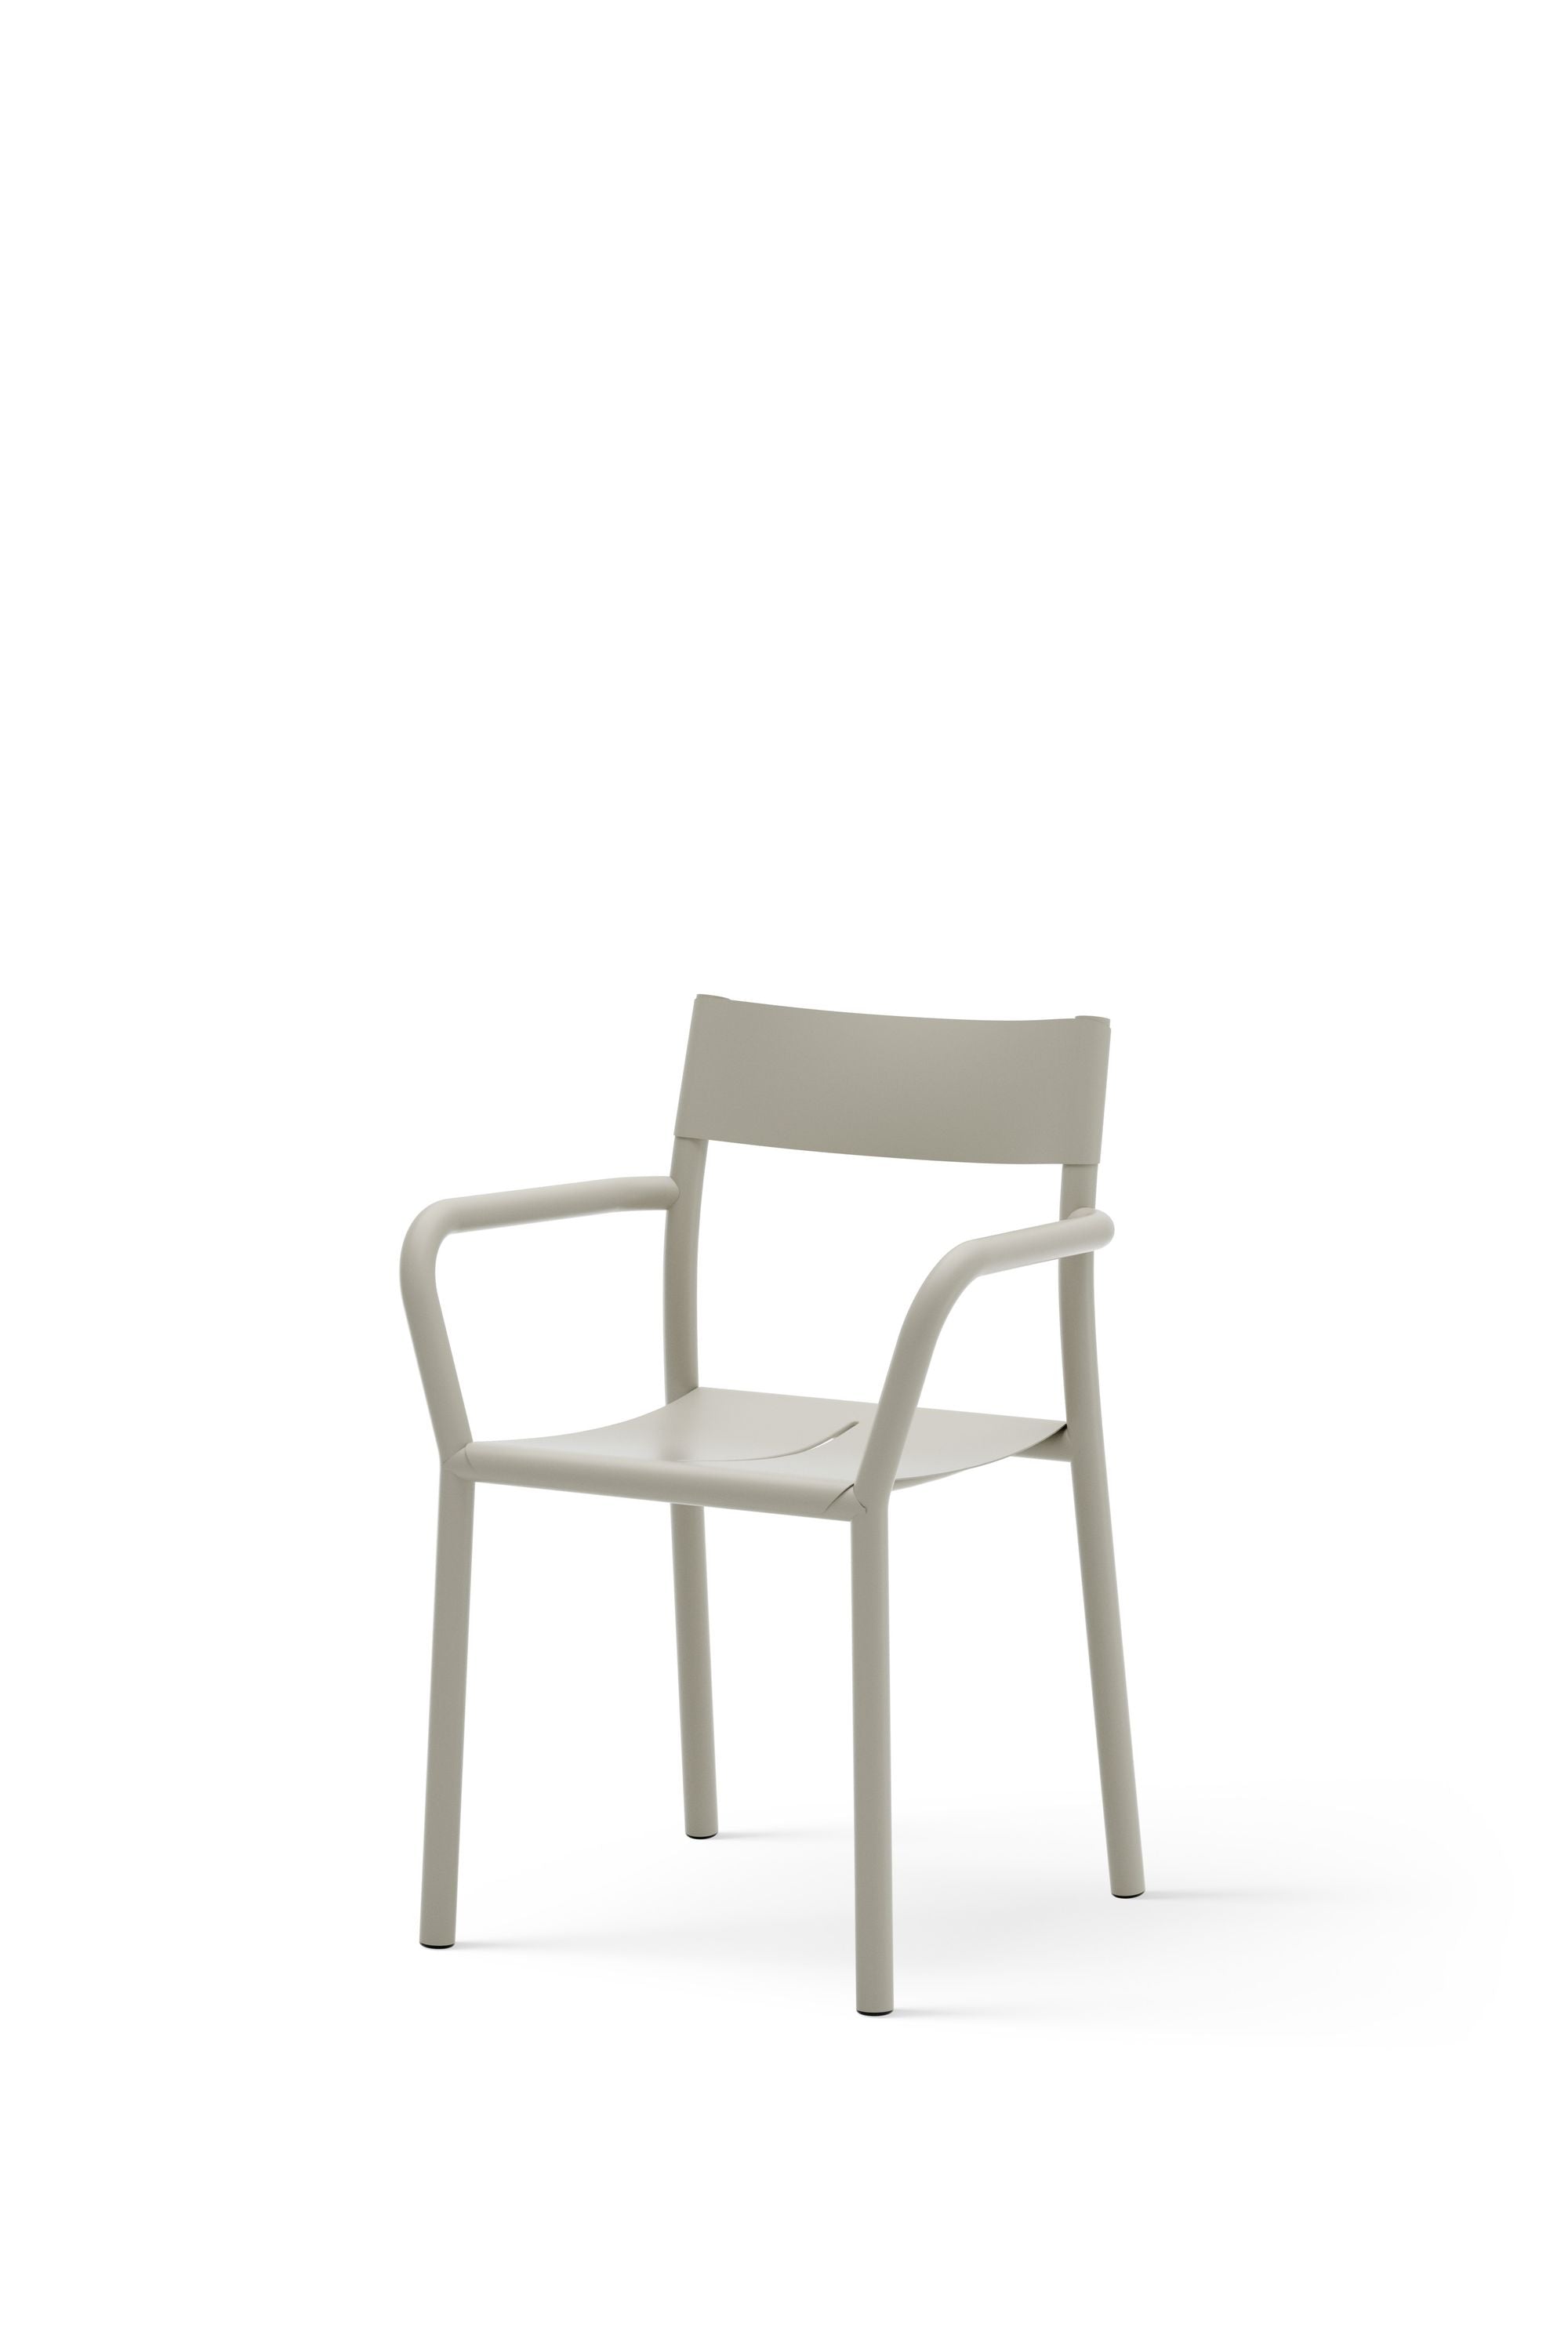 New Works Mai fauteuil, gris clair